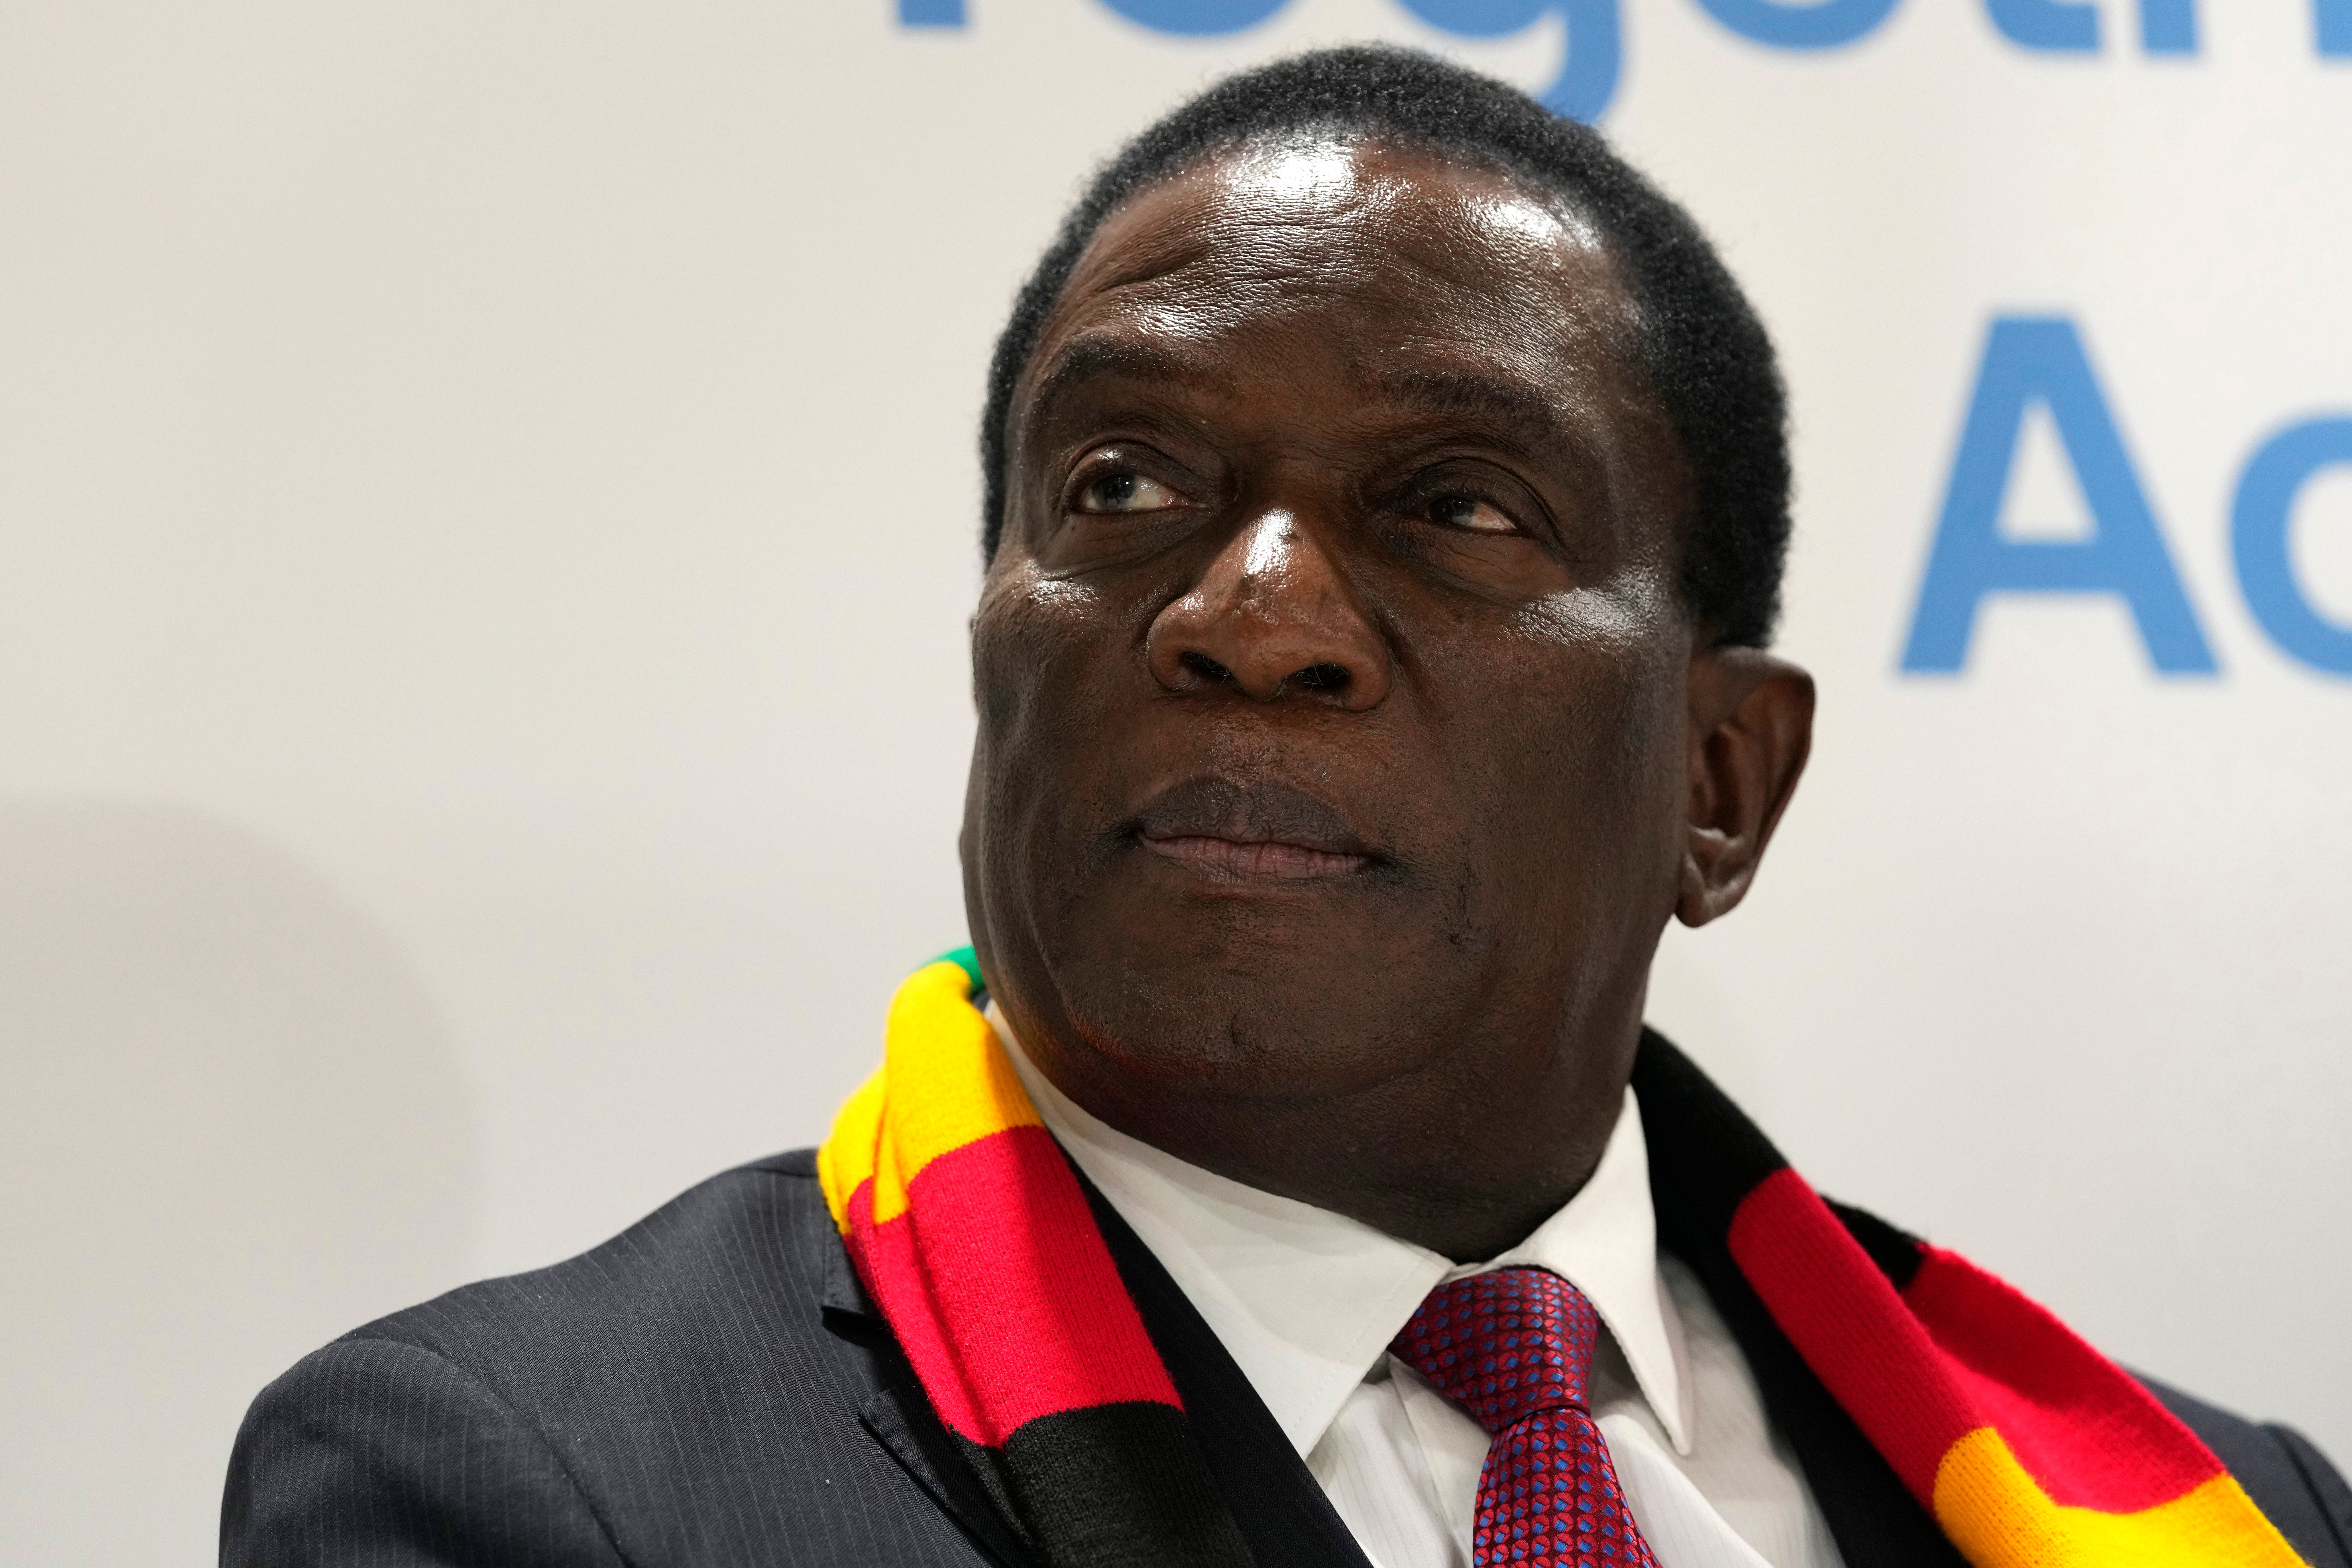 Zimbabwe's President Emmerson Mnangagwa won reelection for a second term in August 2023